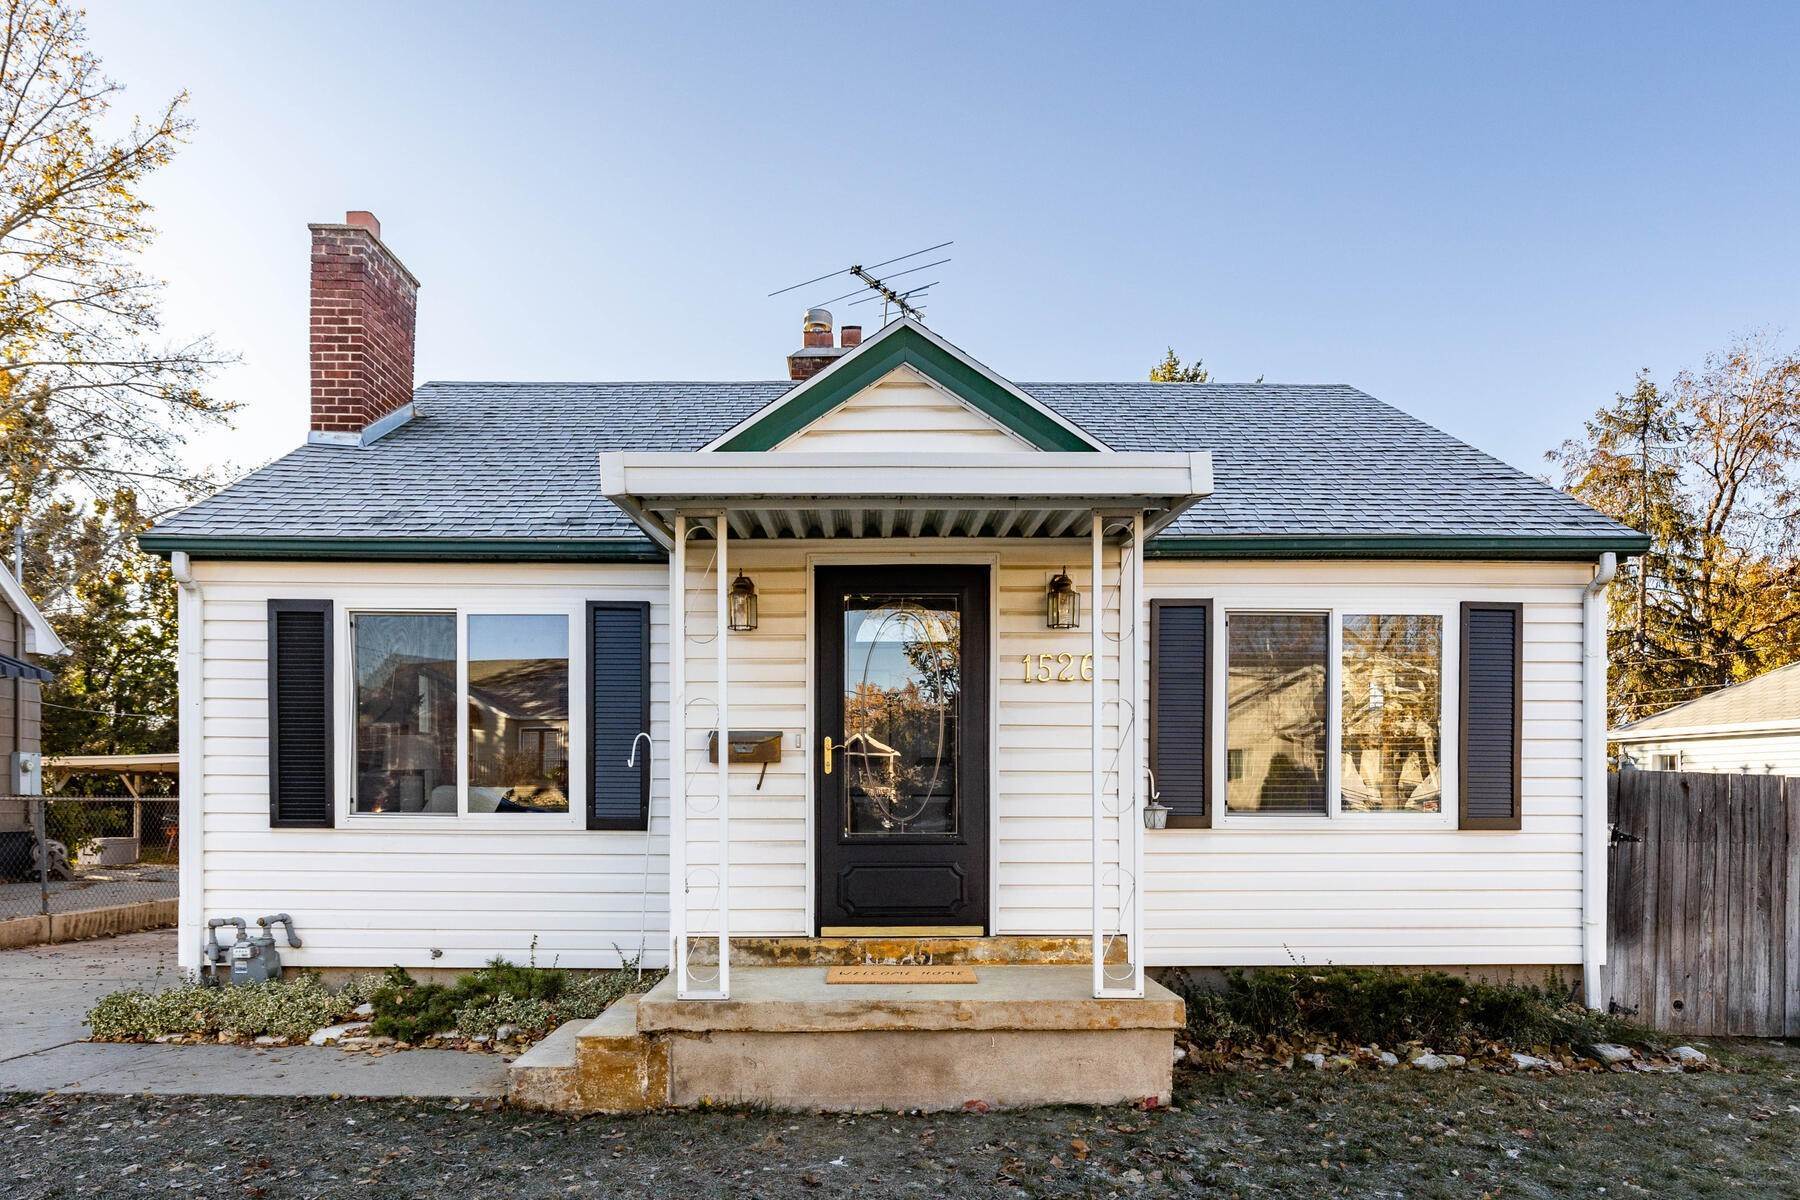 Single Family Homes for Sale at Say Hello to The Most Charming Little Bungalow in The Heart of Sugarhouse! 1526 E Ramona Ave Salt Lake City, Utah 84105 United States